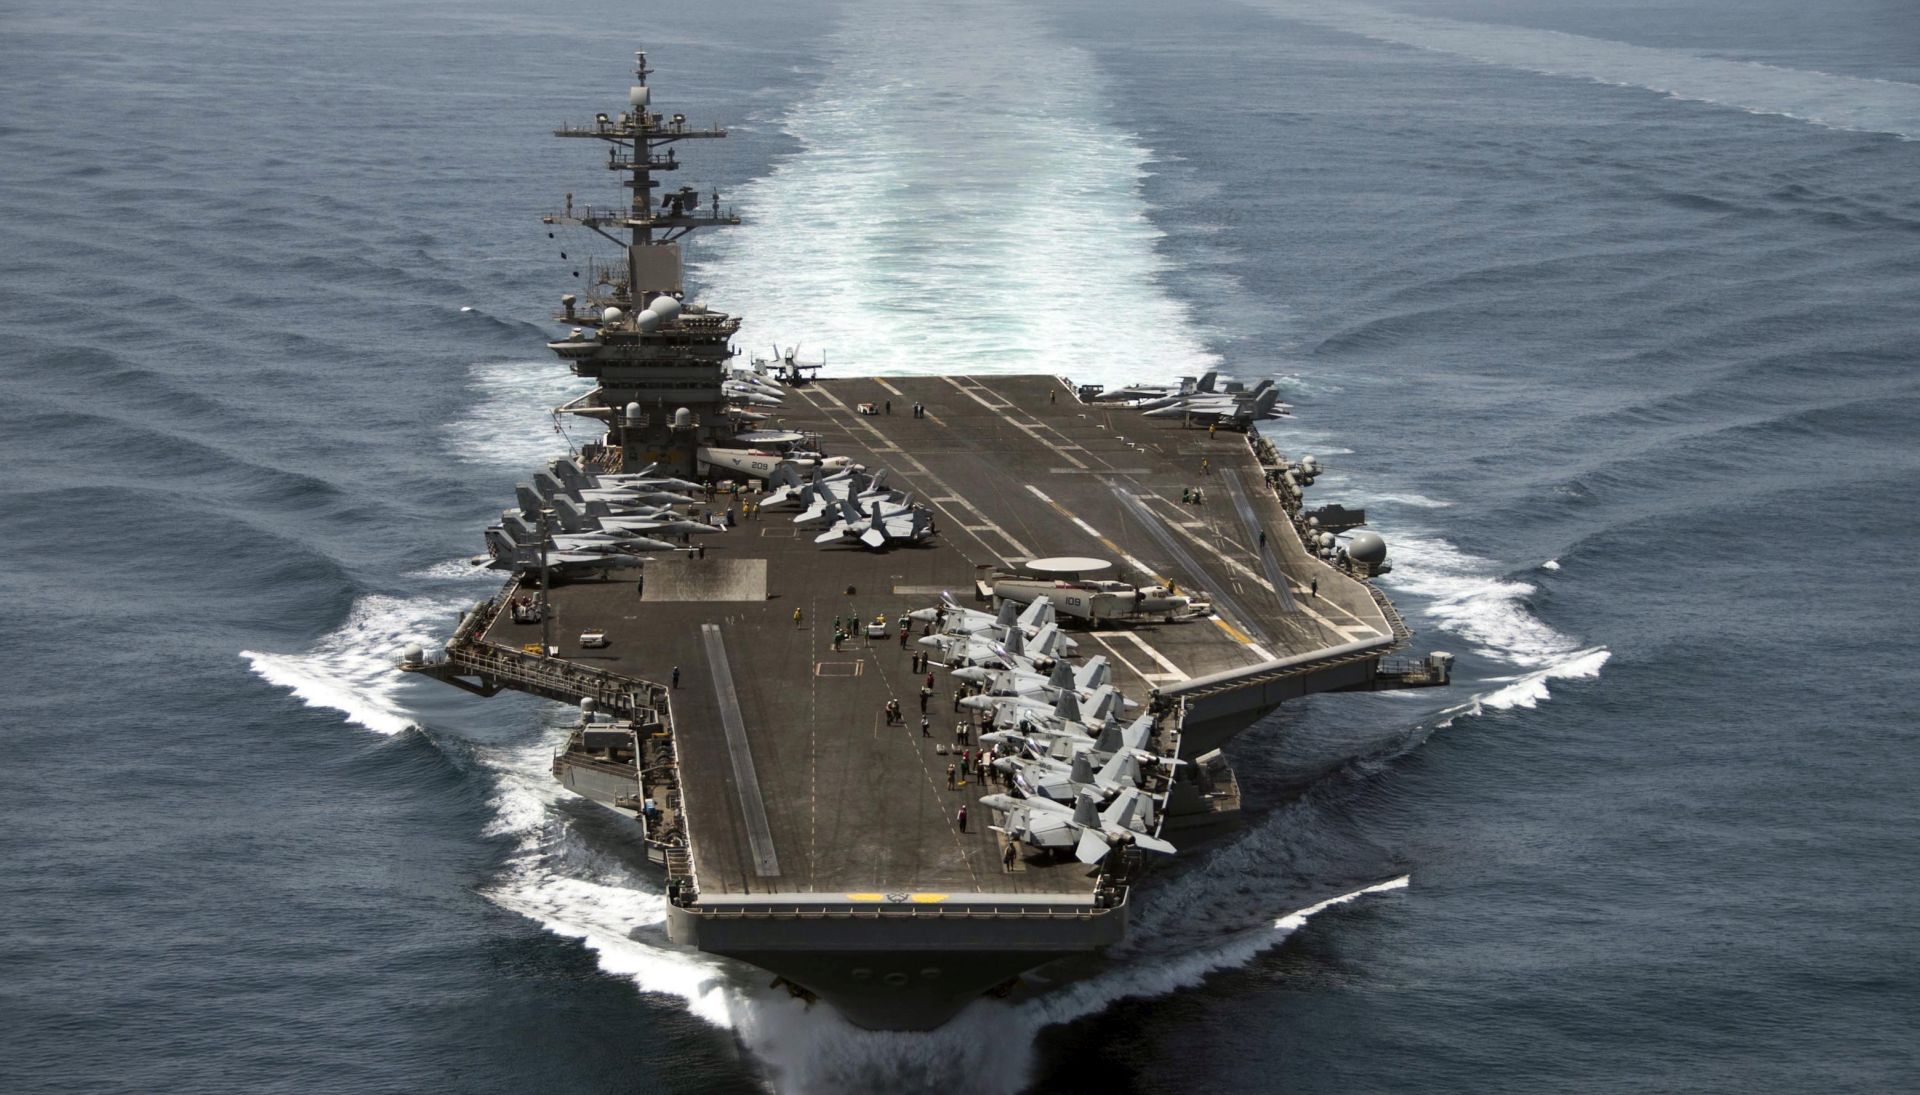 epa08335877 (FILE) - An aerial handout image made available by US Navy showing the aircraft carrier USS Theodore Roosevelt (CVN 71) operating in the Arabian Sea on 21 April 2015 (reissued 01 April 2020). According to reports,  Captain Brett Crozier, captain of the US aircraft carrier Theodore Roosevelt, which is currently docked in Gua, has penned a letter calling for decisive action to be taken to avert deaths on the carrier.  EPA/MC3 ANTHONY N. HILKOWSKI / HANDOUT  HANDOUT EDITORIAL USE ONLY/NO SALES